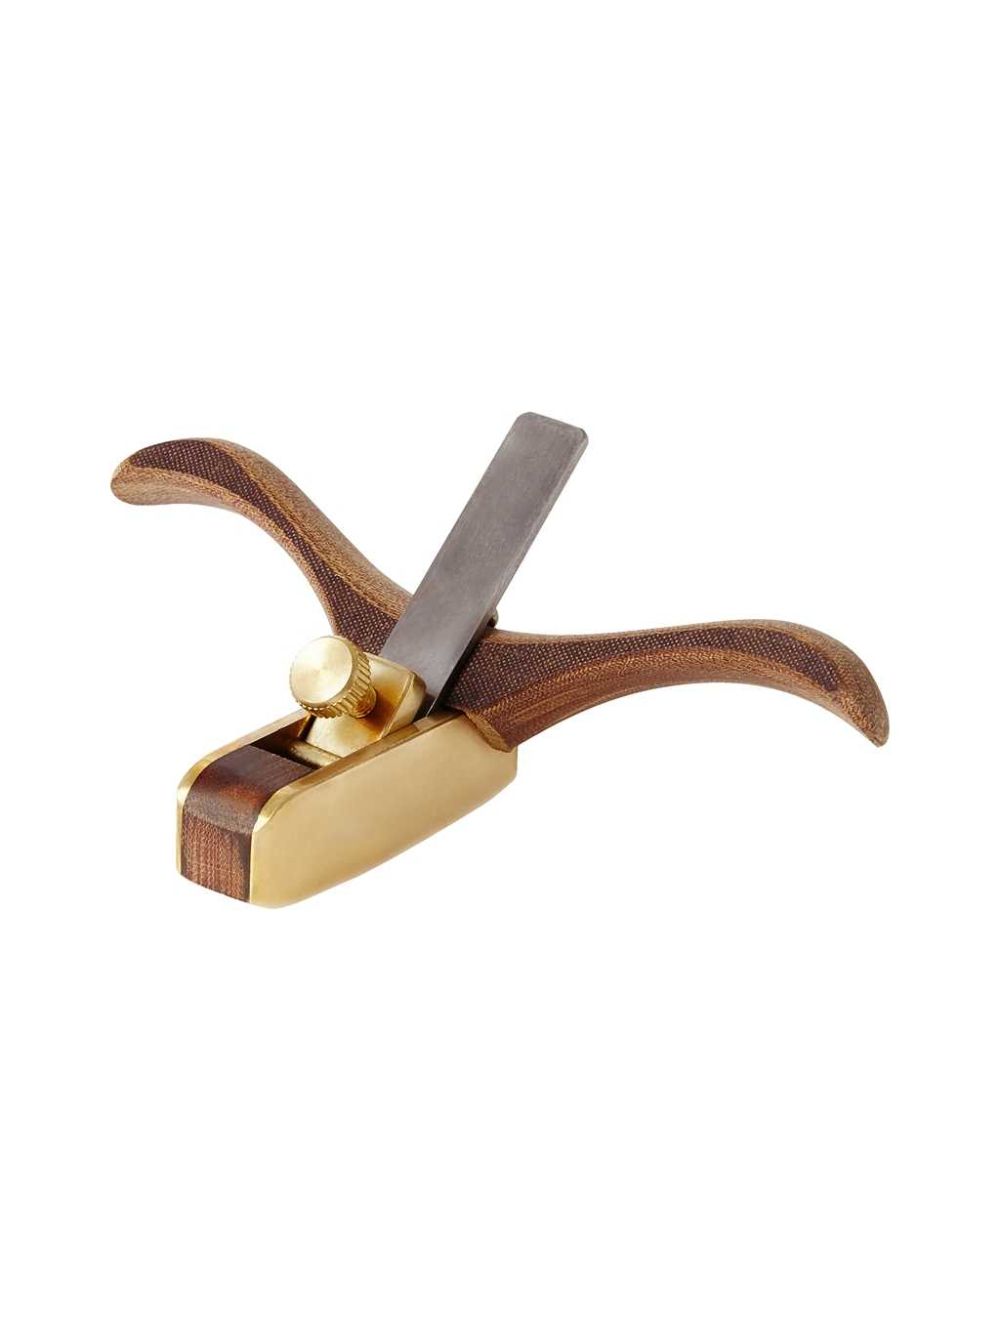 Curved-sole Plane / Spokeshave 10mm